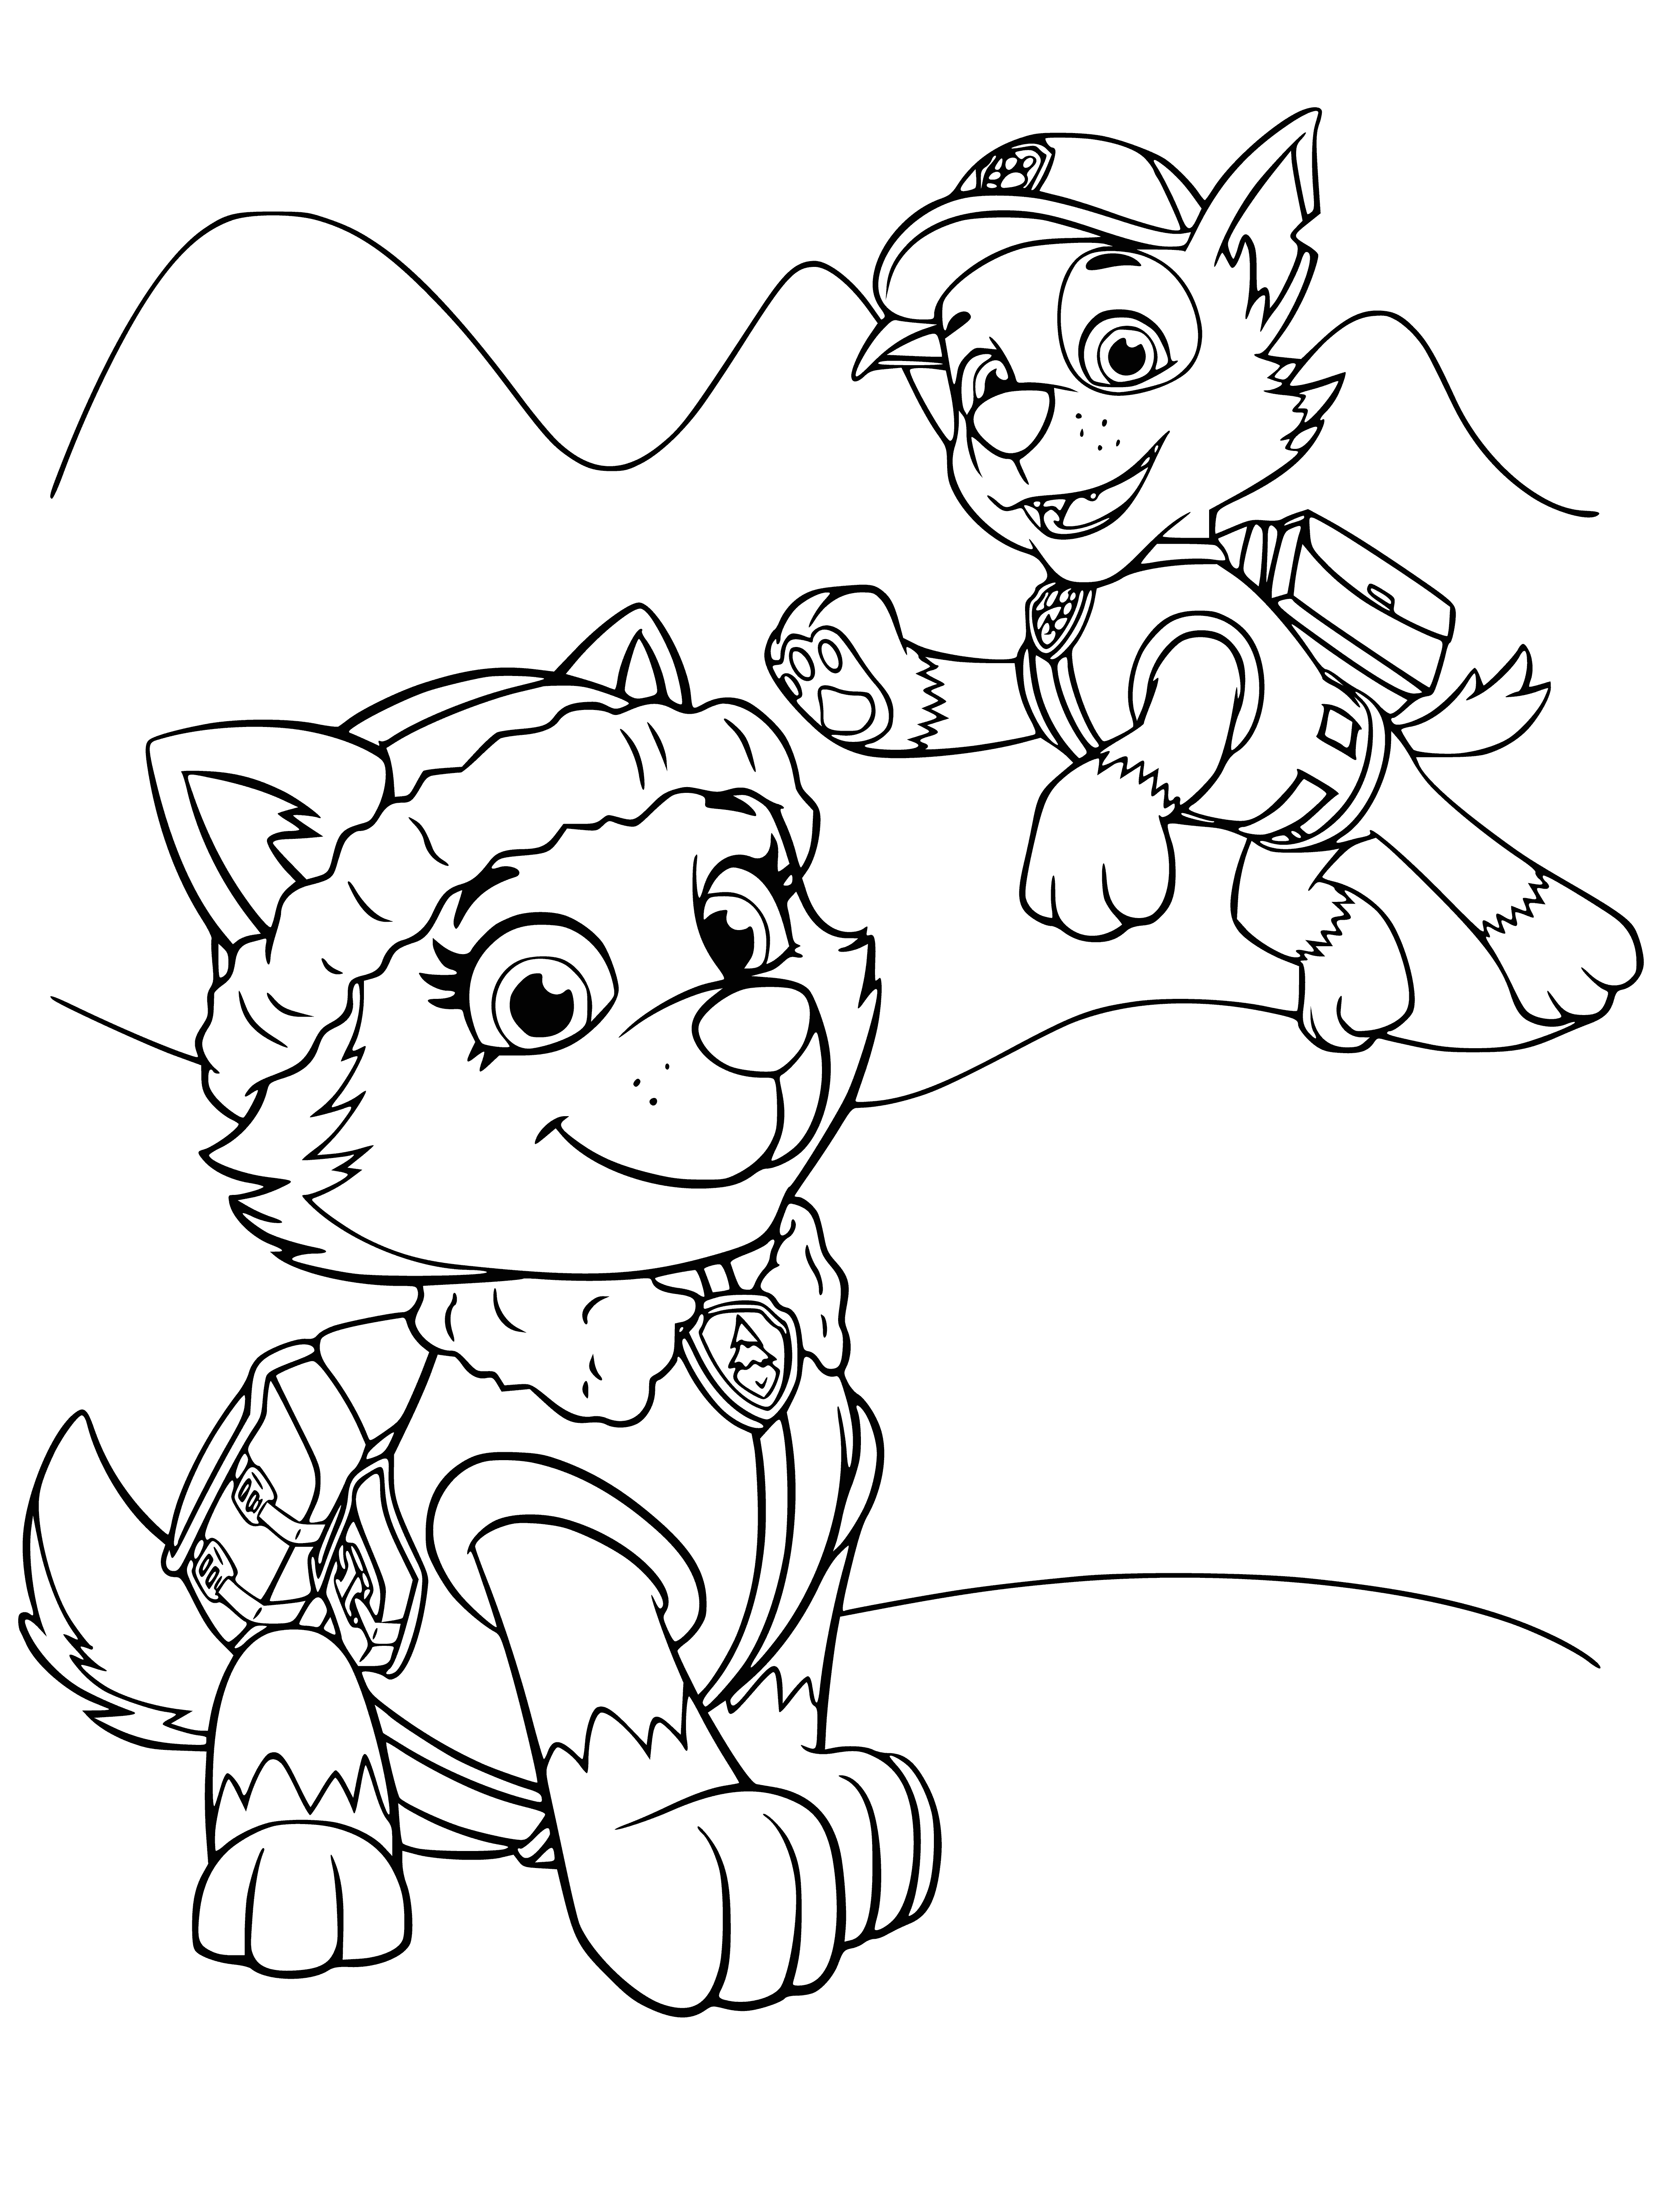 Everest and Rocky coloring page